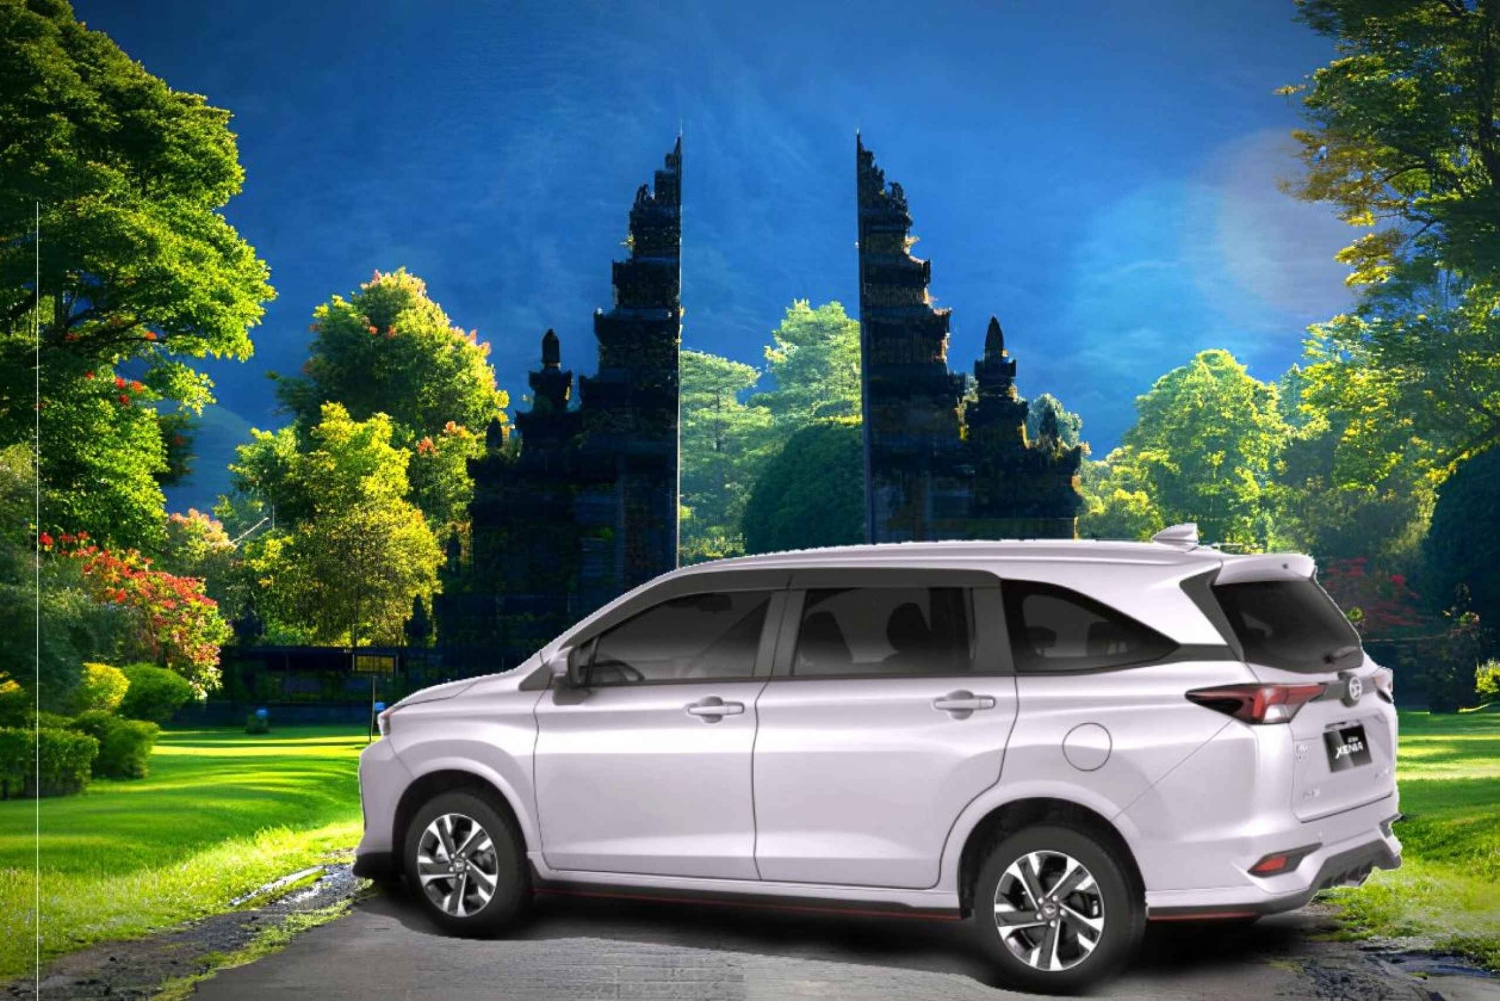 Bali Explorer: Tailored Adventures with Private Driver